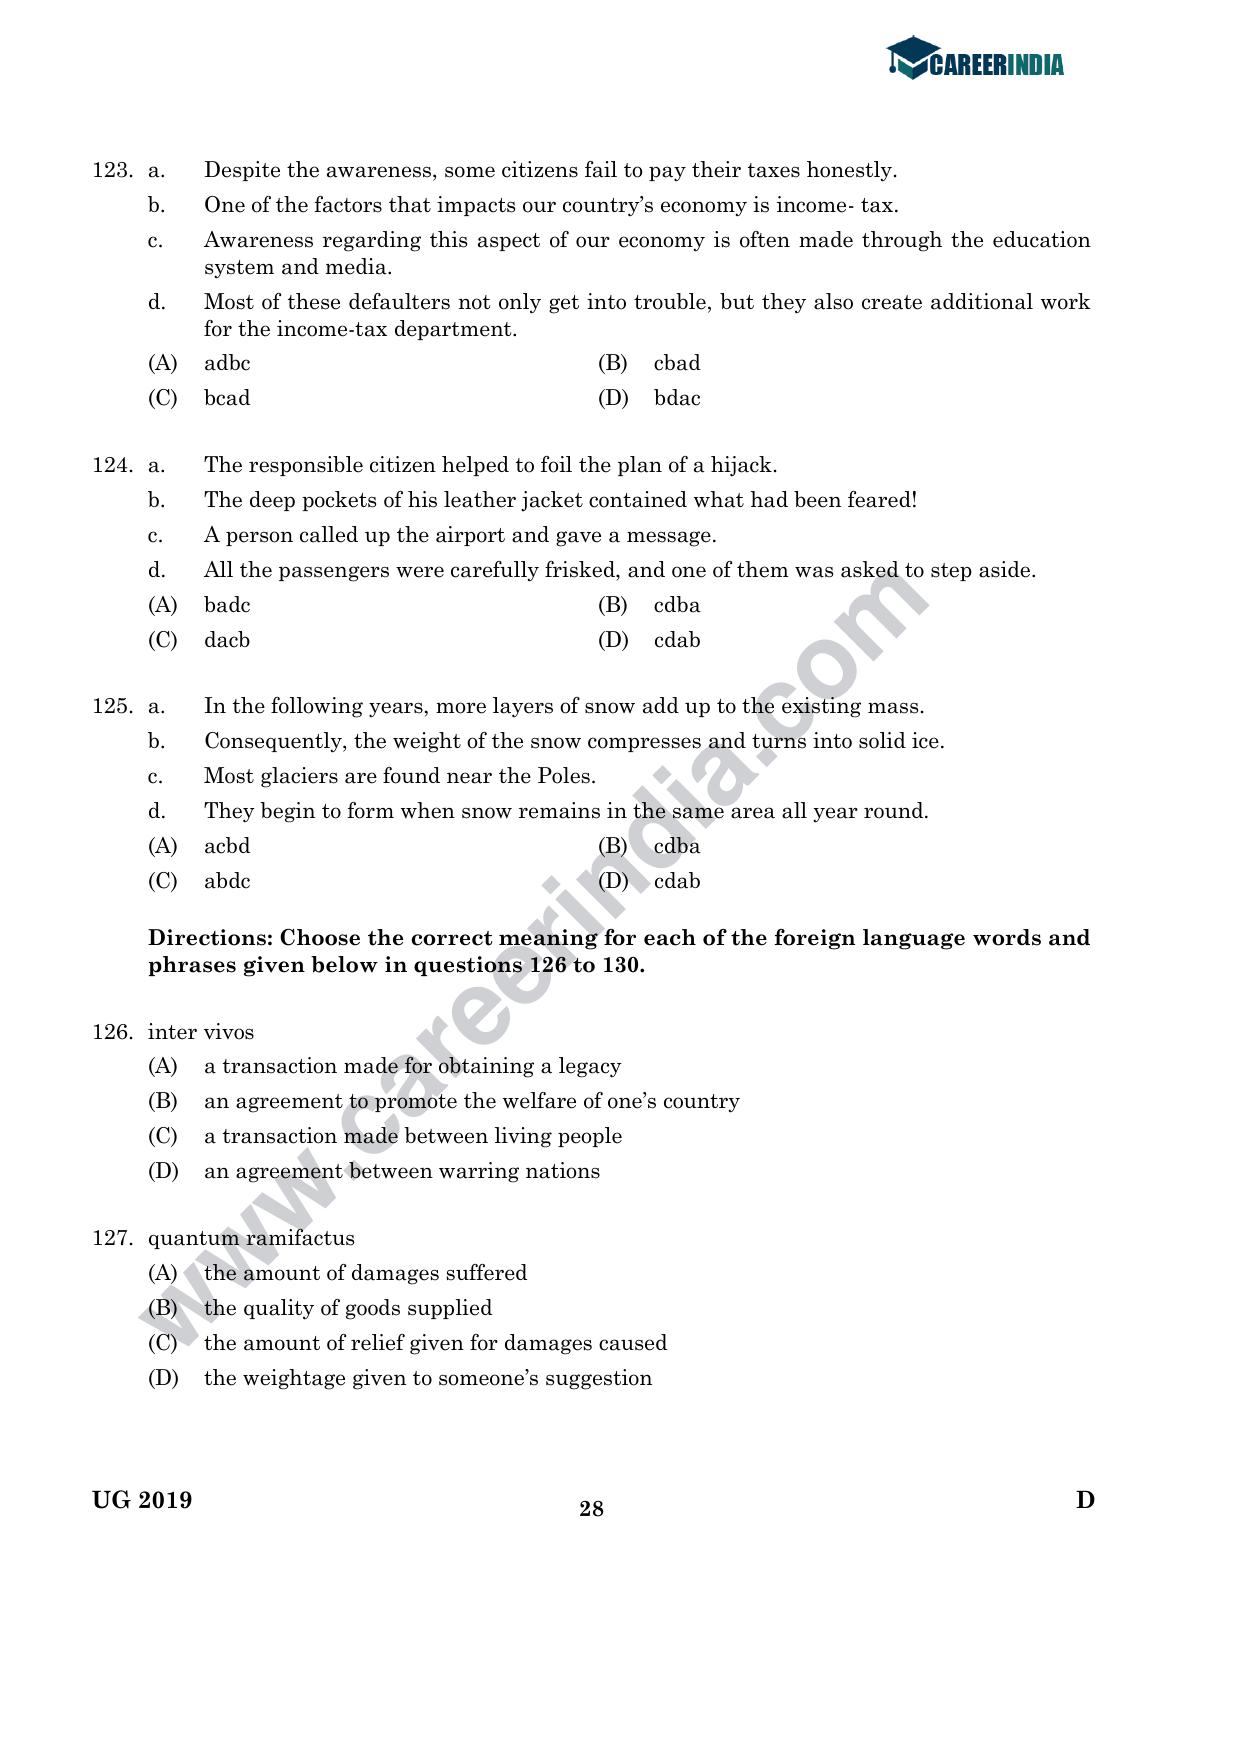 CLAT 2019 UG Logical-Reasoning Question Paper - Page 27